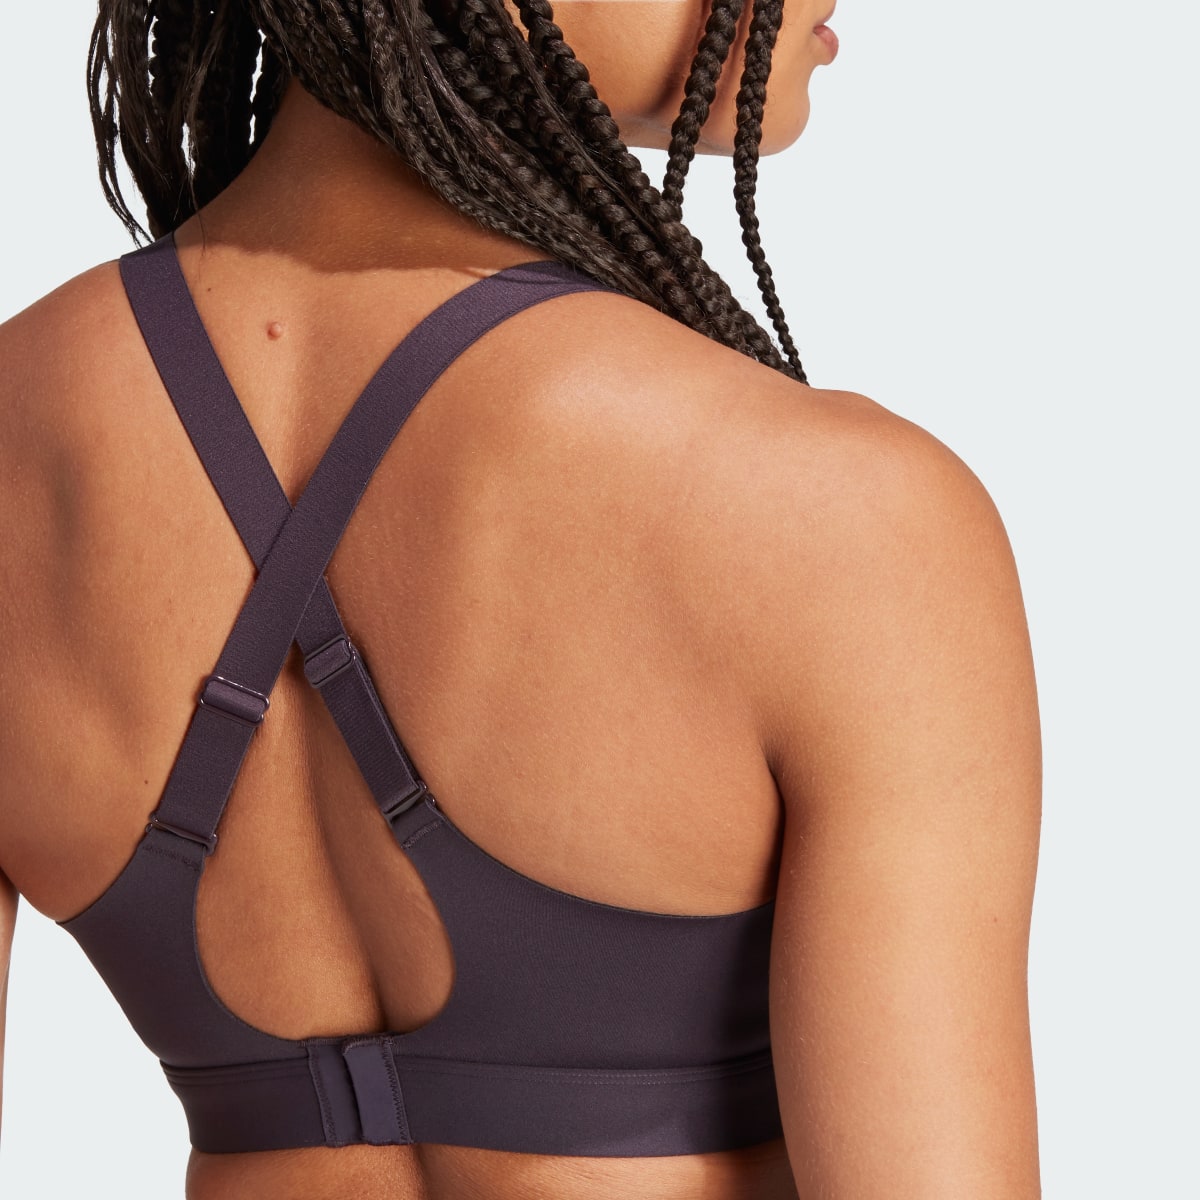 Adidas Brassière de training TLRD Impact Luxe Maintien fort. 7